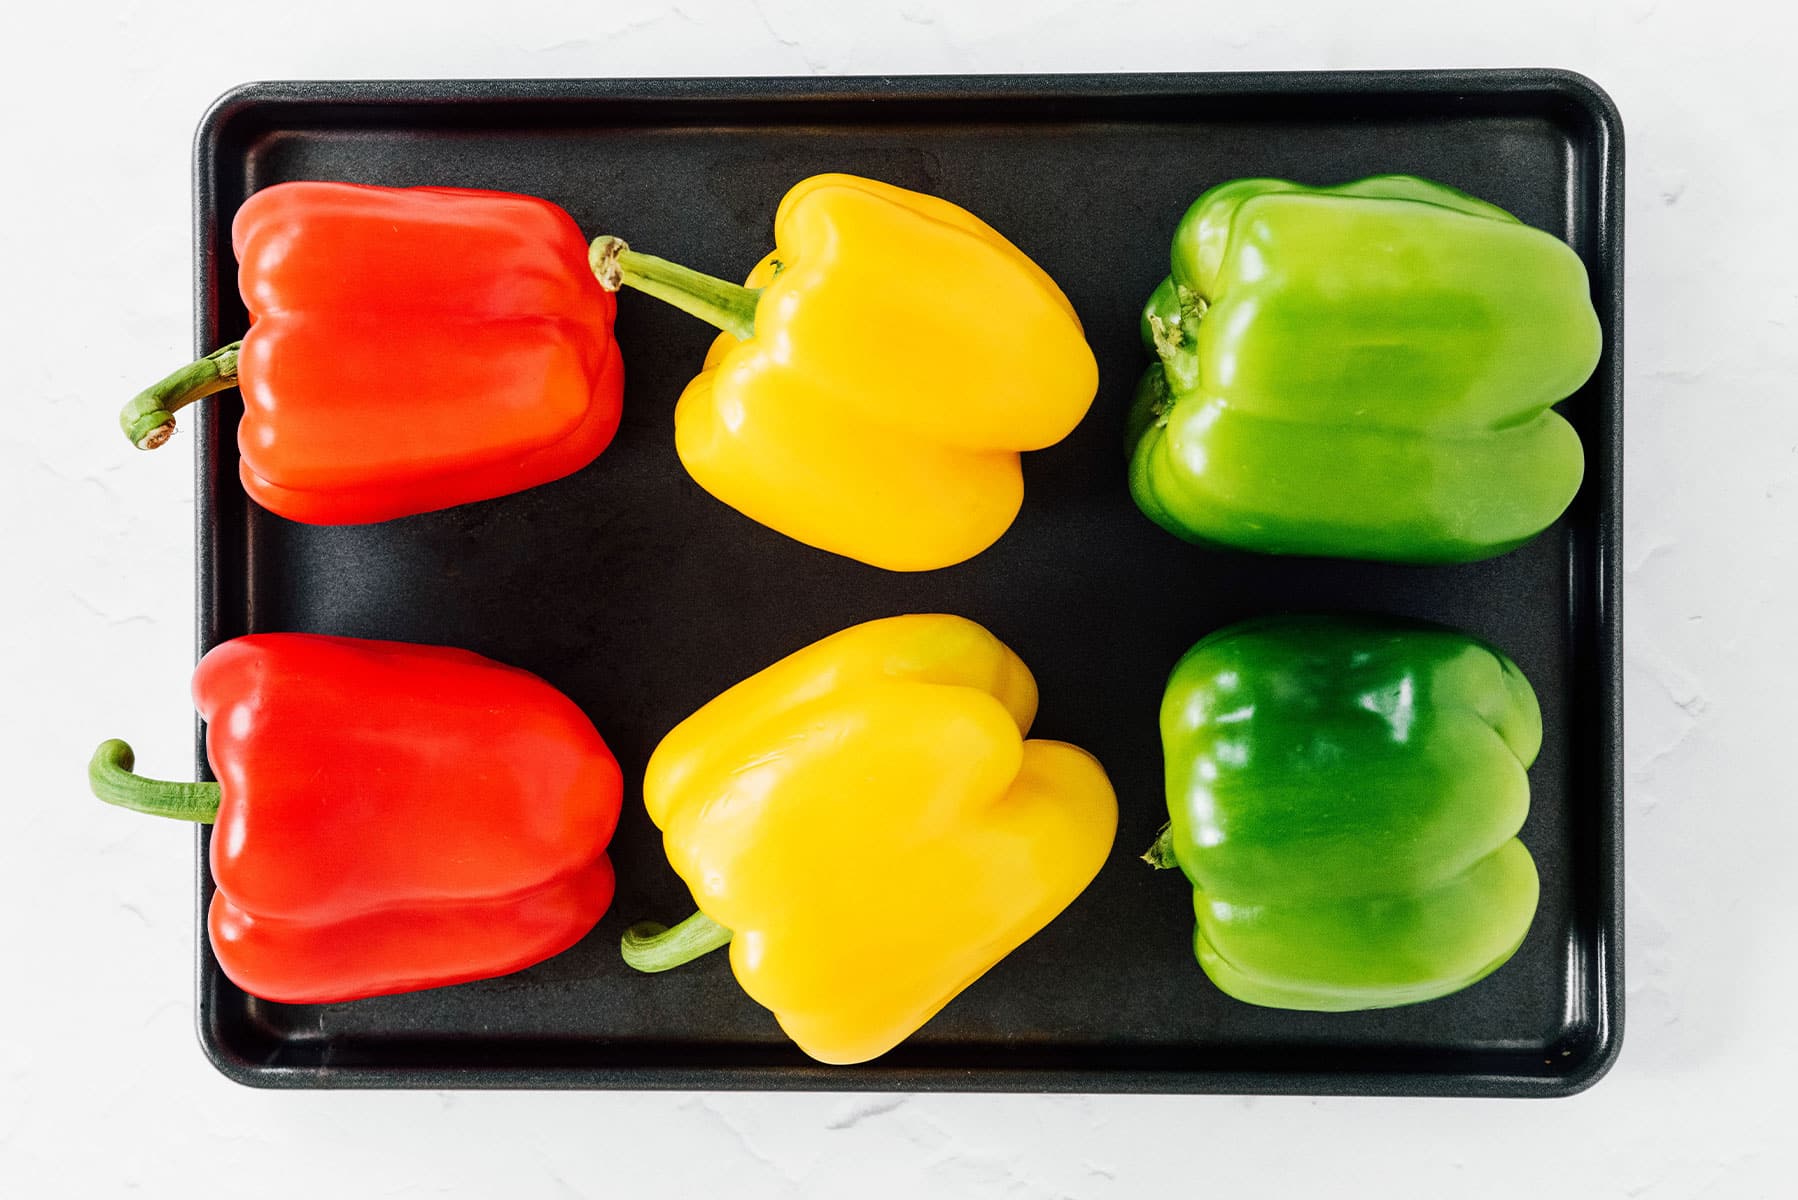 Red, yellow, and green bell peppers on a black tray.